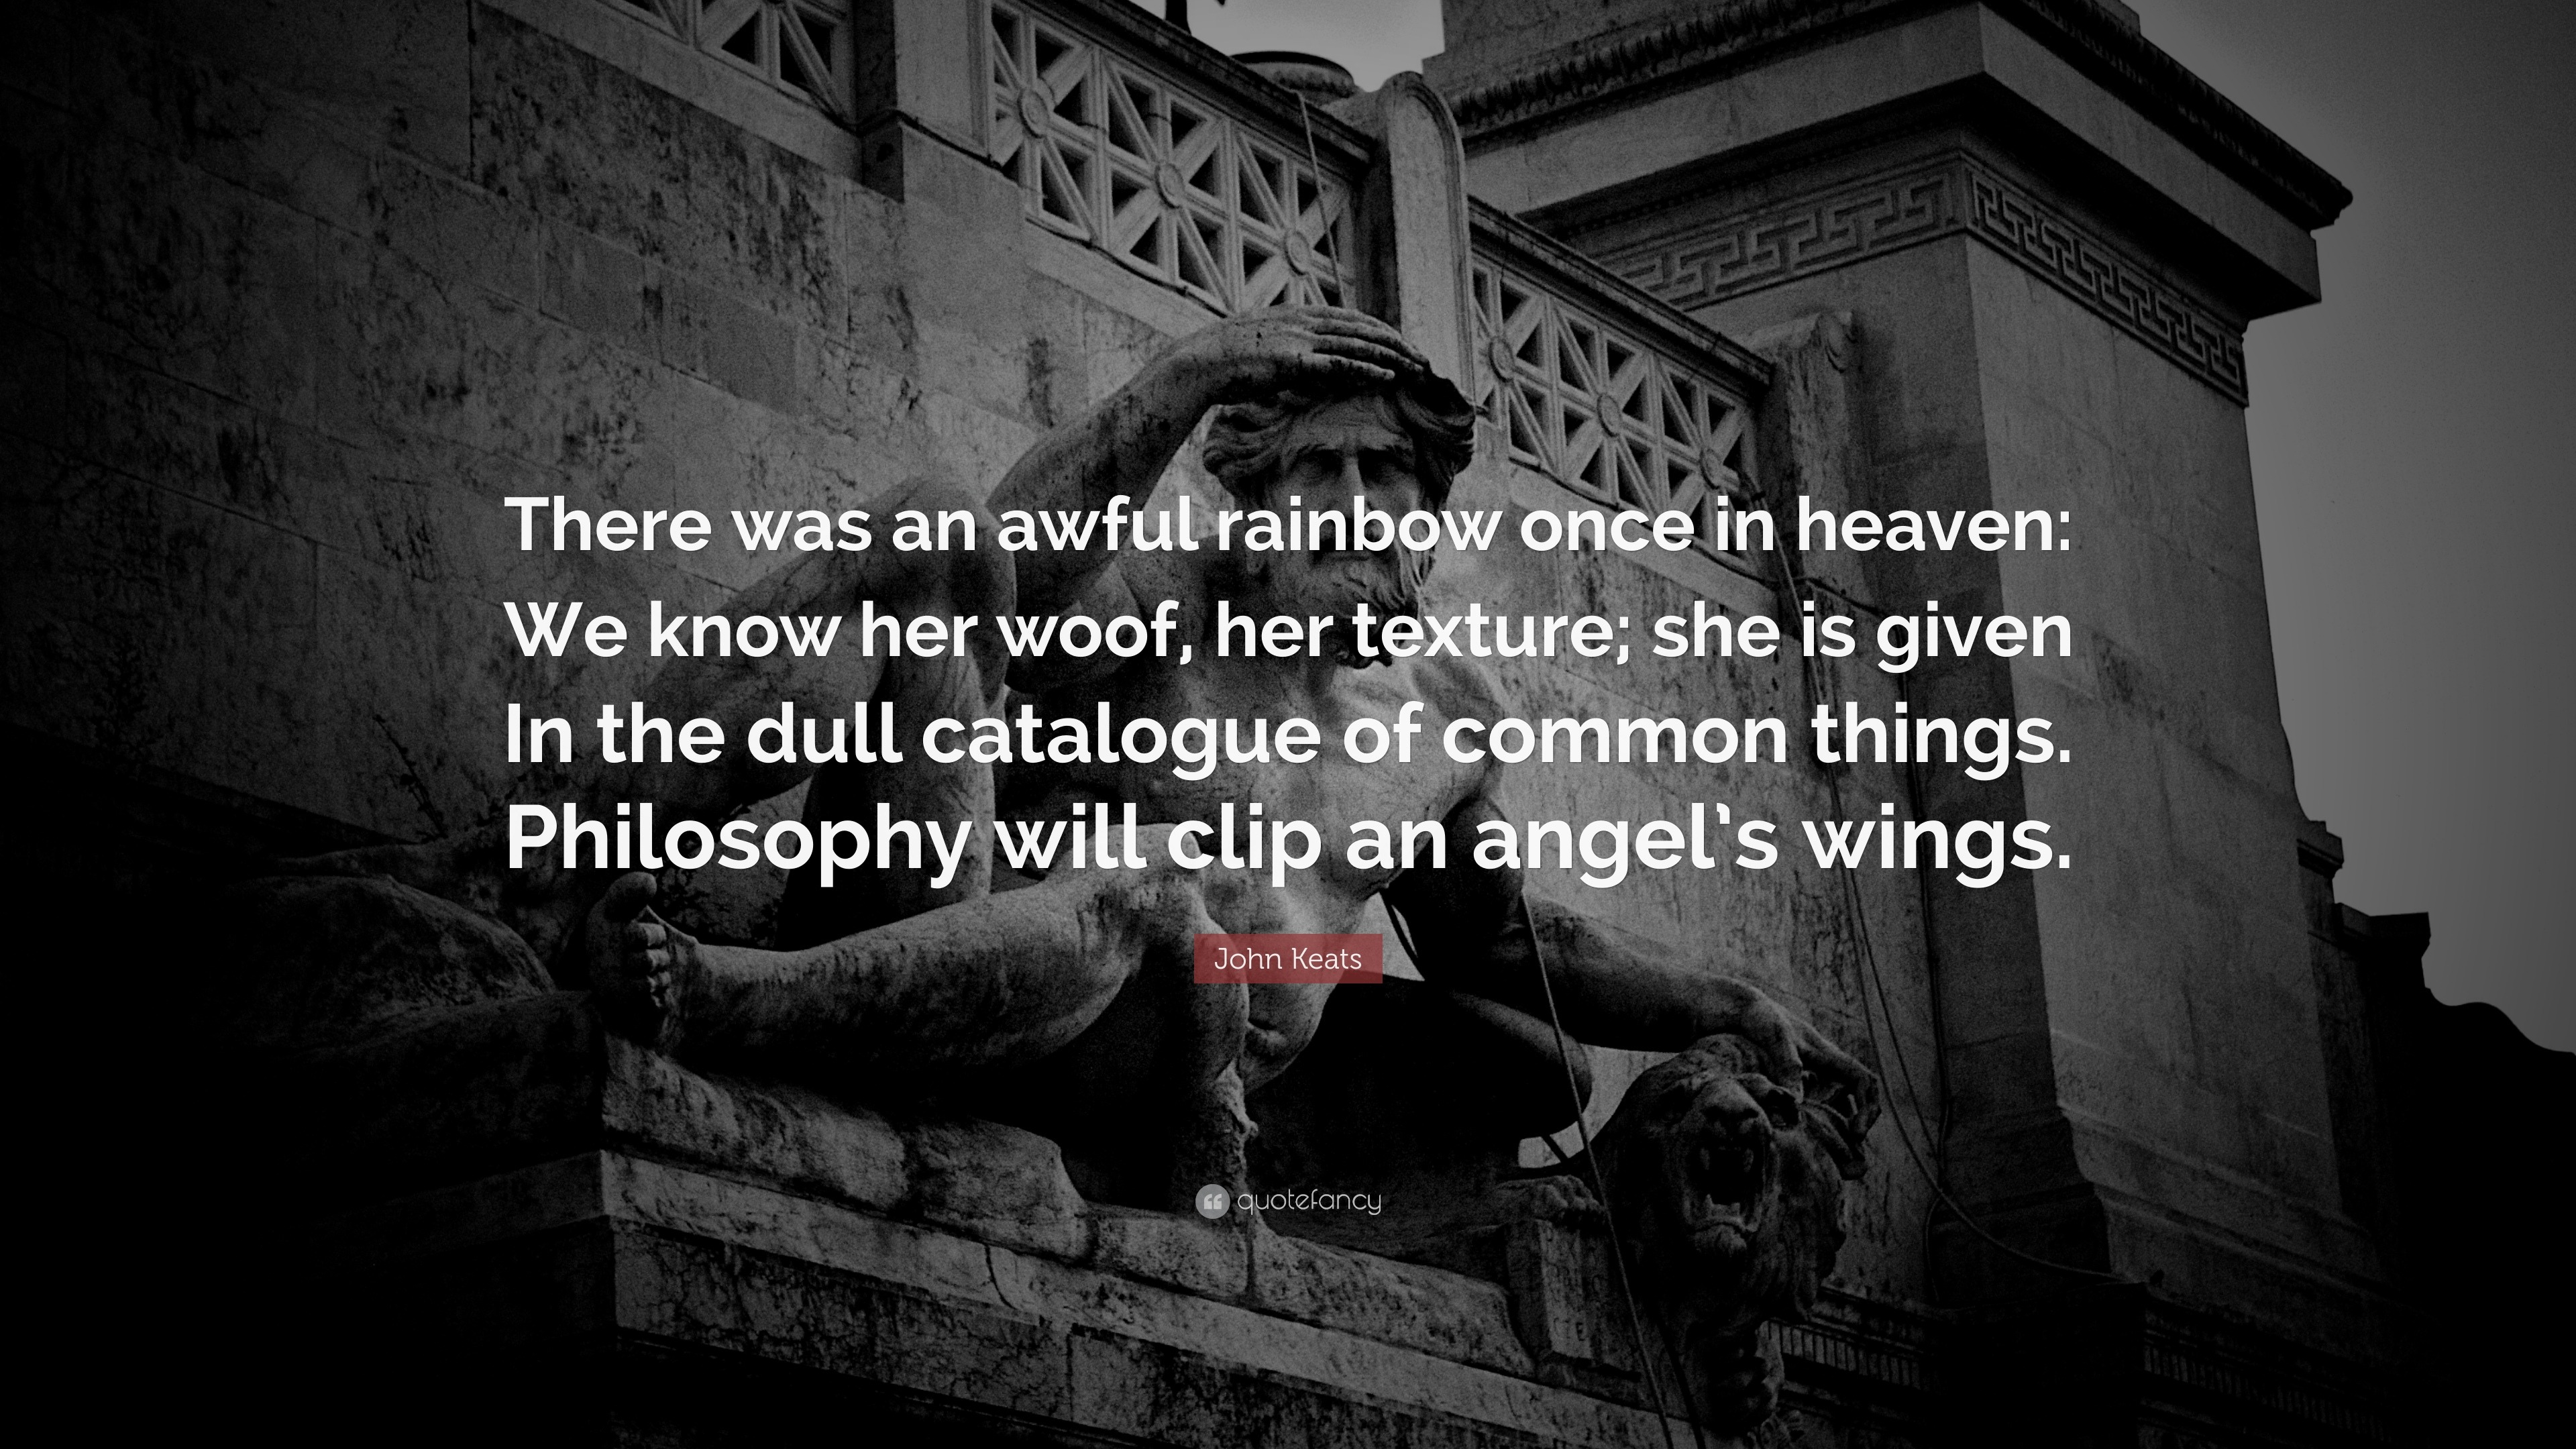 John Keats Quote: “There was an awful rainbow once in heaven: We know ...